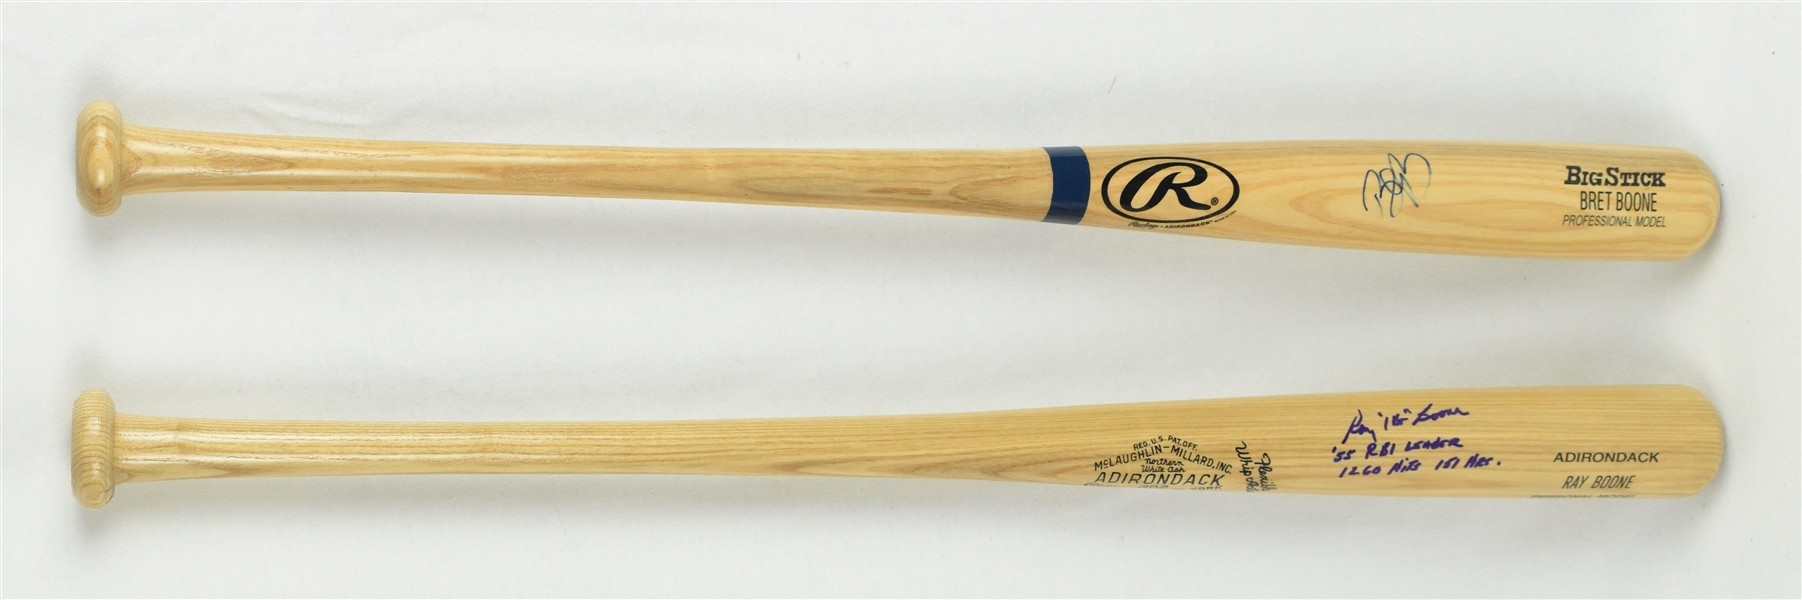 Ray Boone & Bret Boone Autographed Bats 